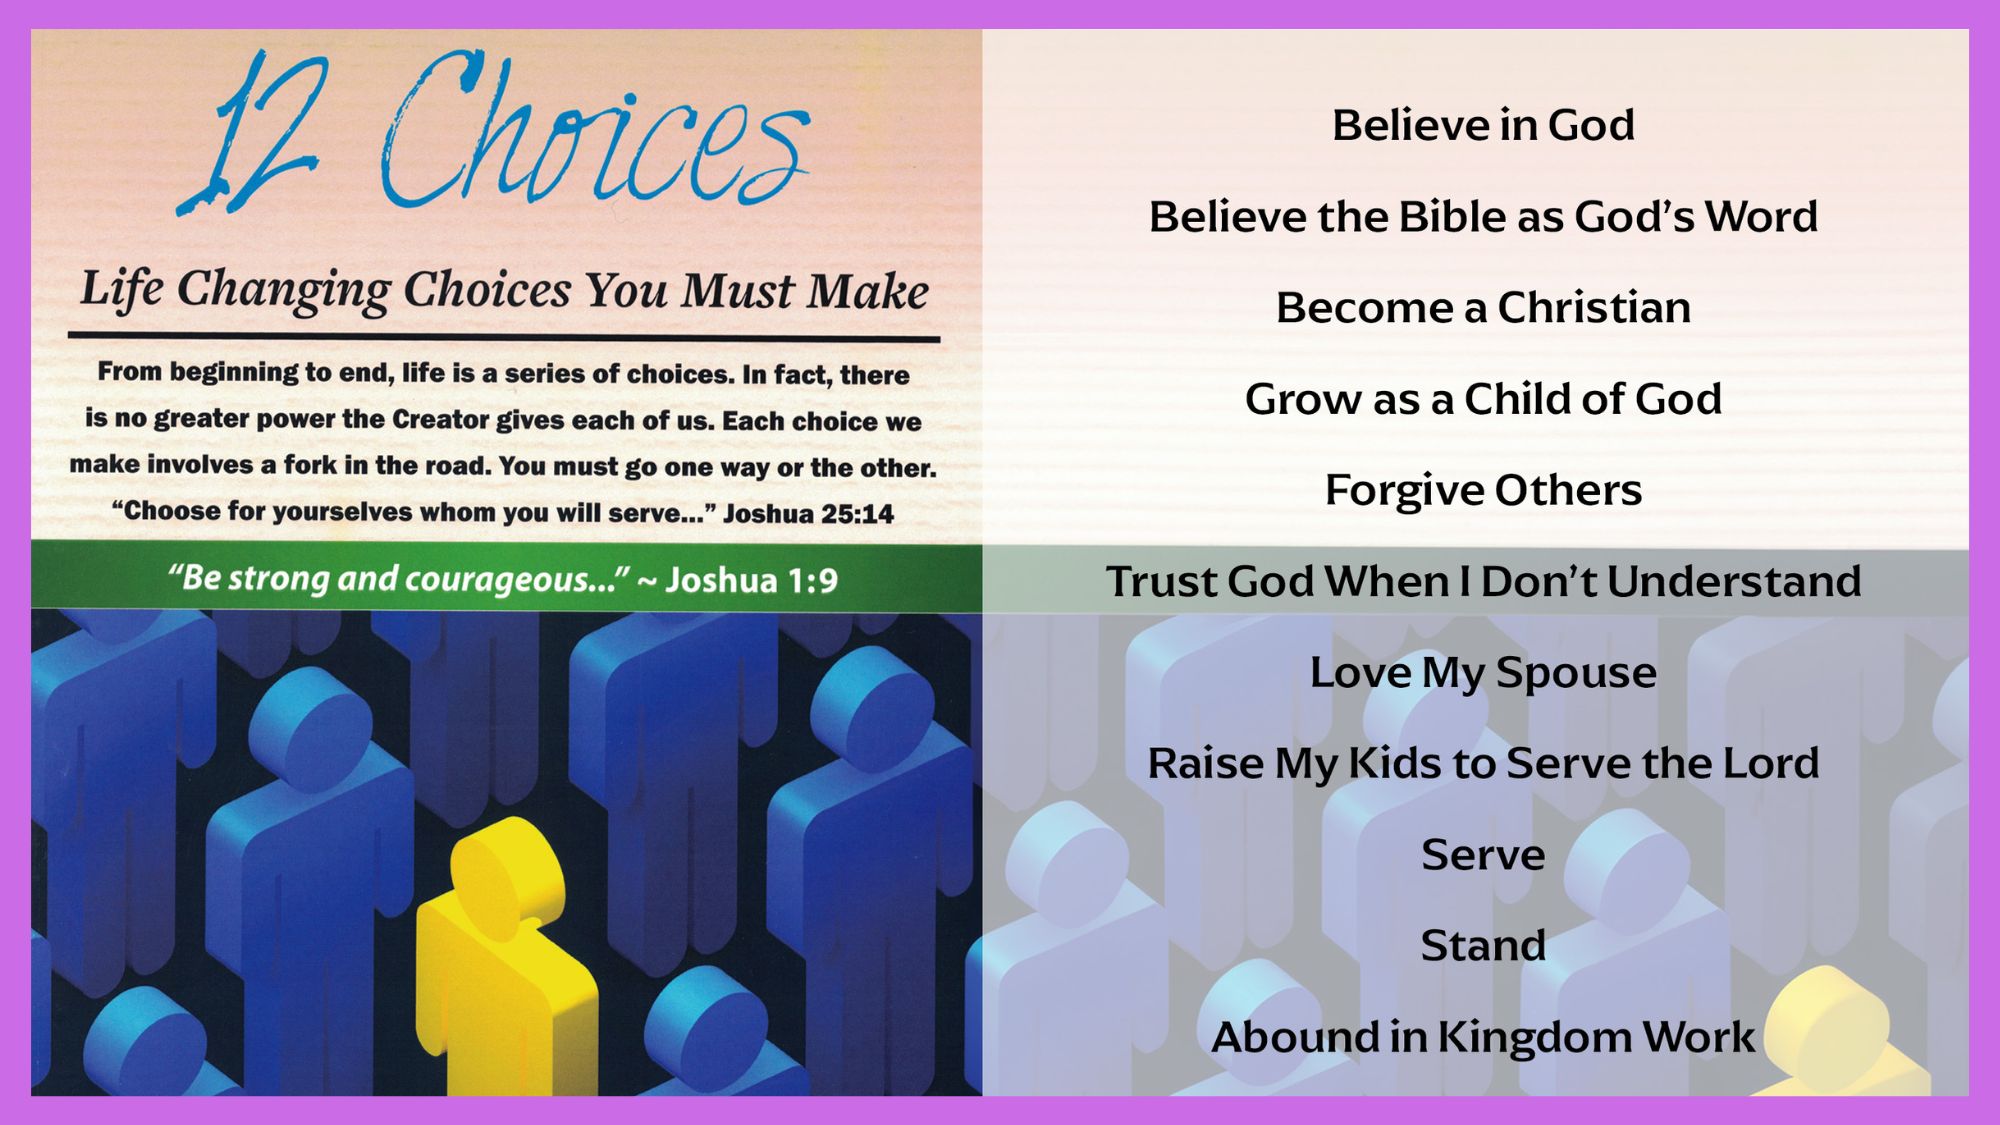 12 Choices - Life Changing Choices You Must Make: Choice # 4 Grow as a Child of God